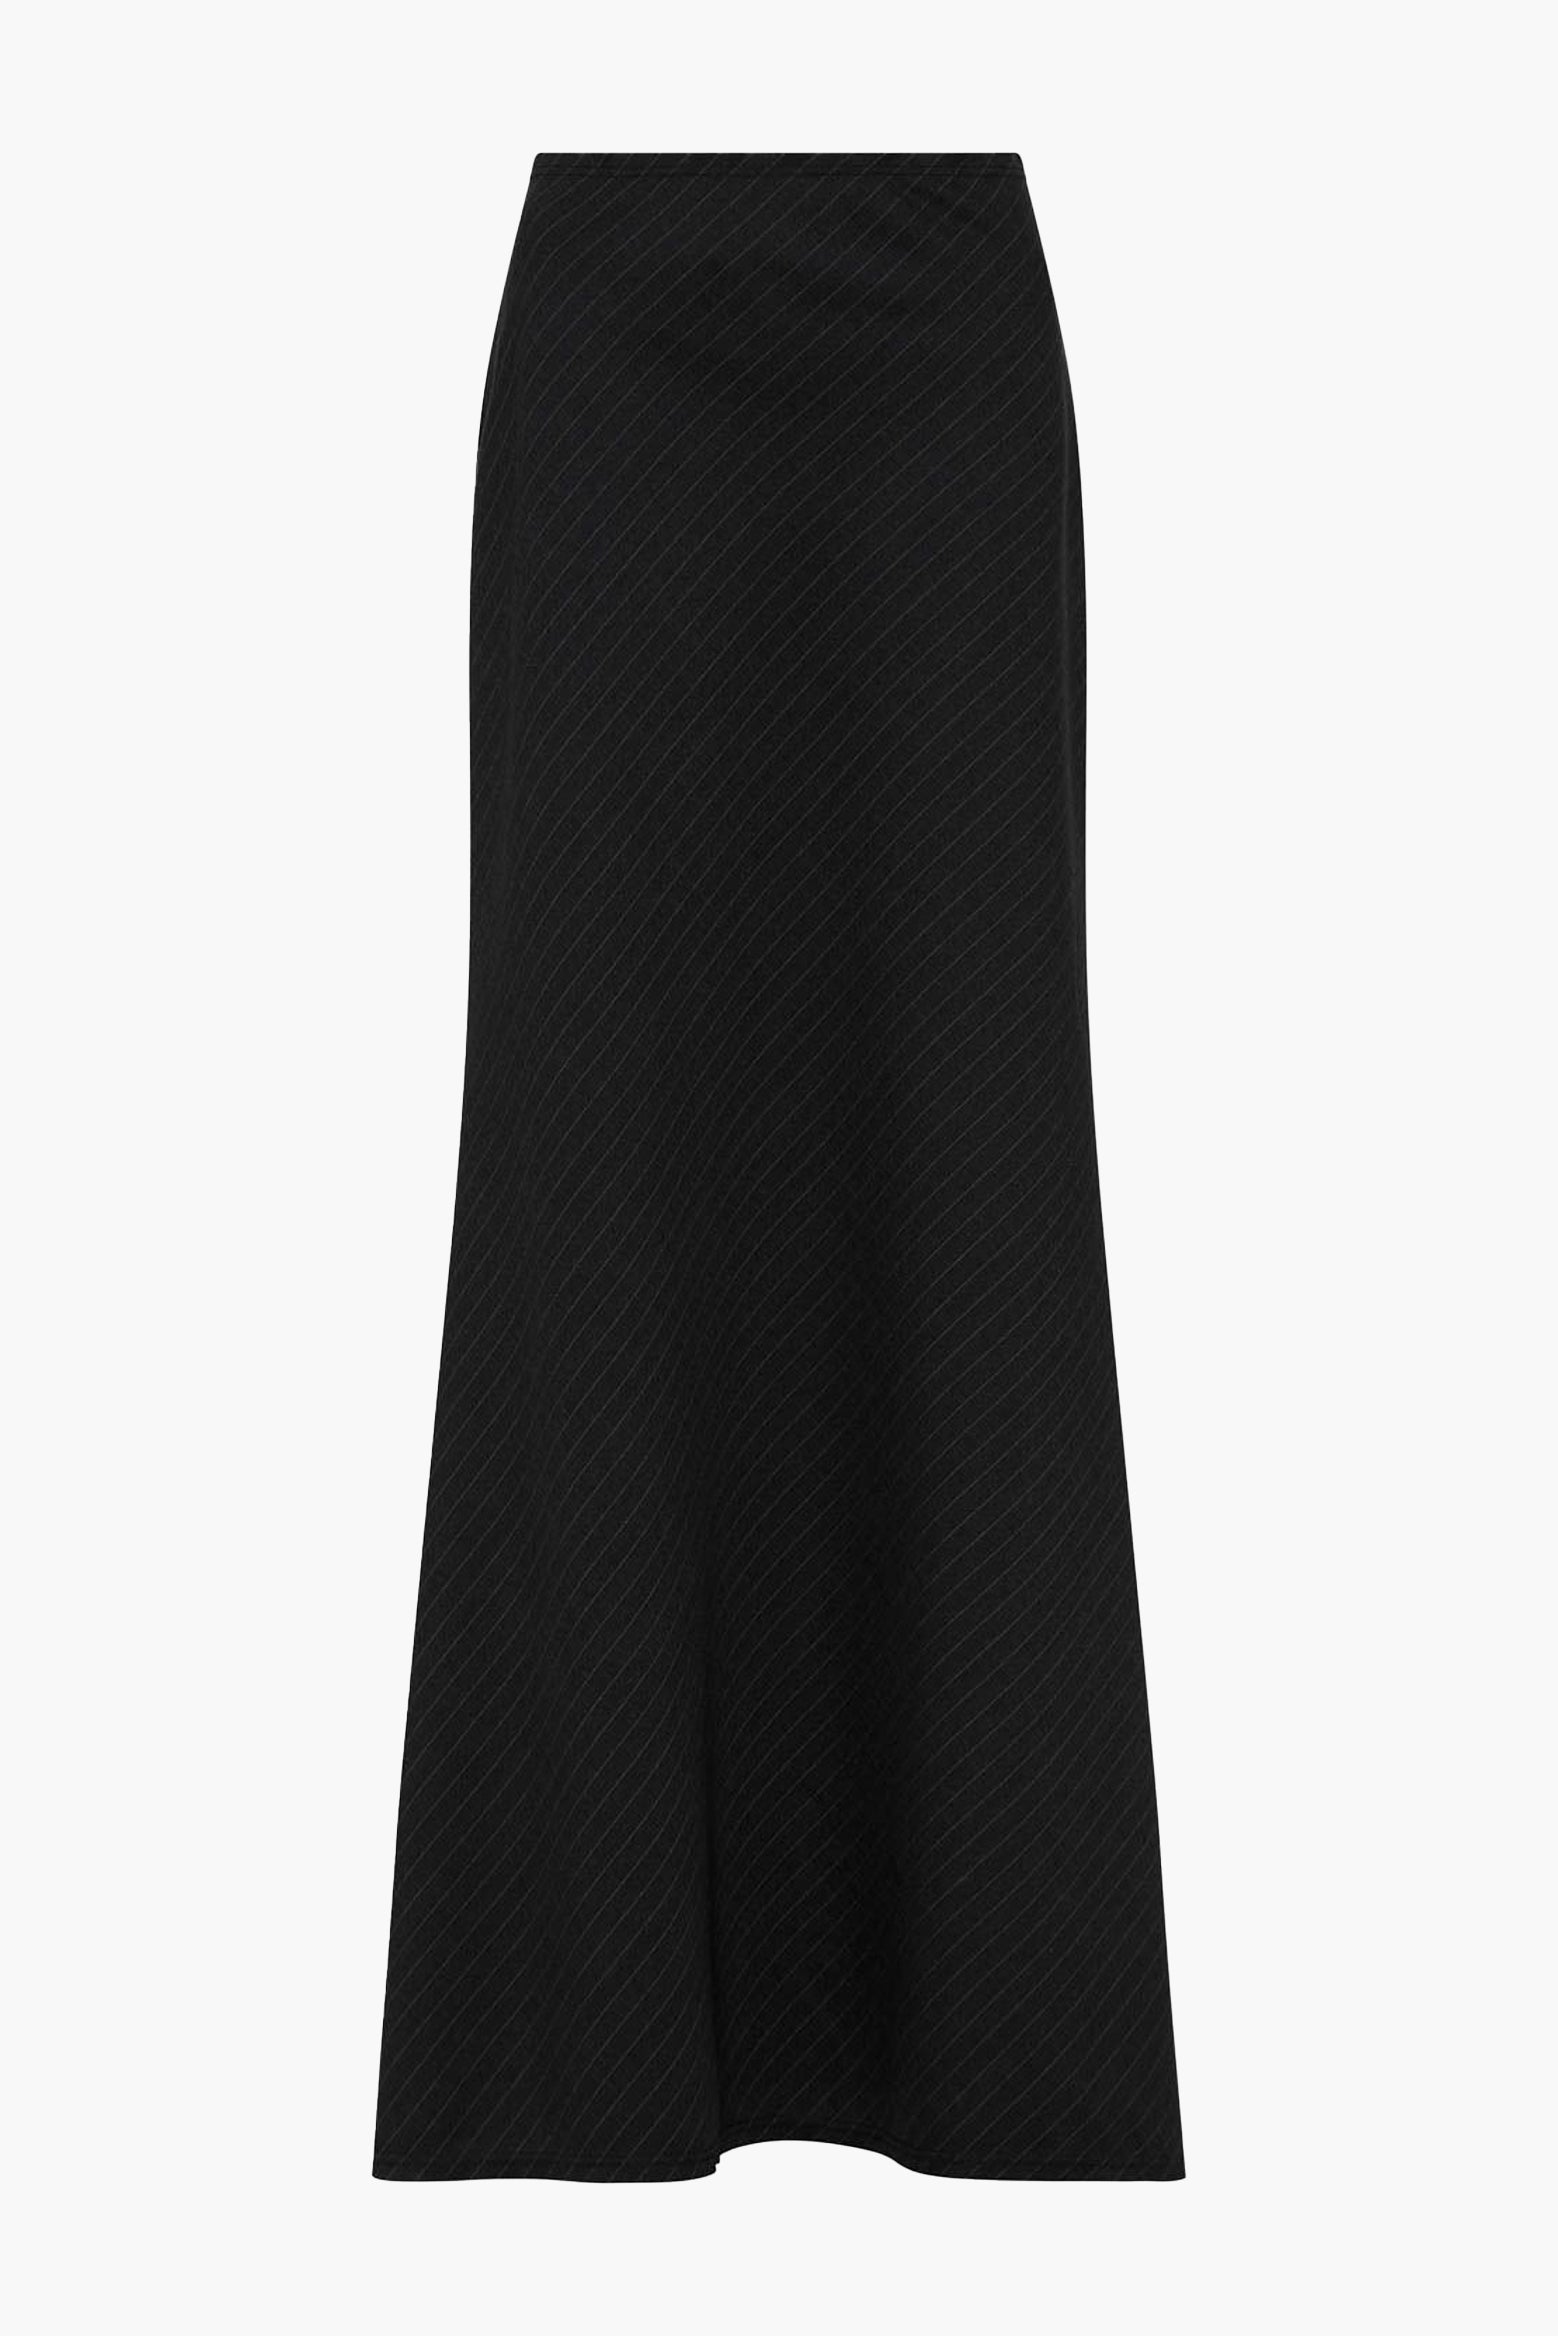 The ST. AGNI Pinstripe Maxi Skirt in Black from The New Trend.